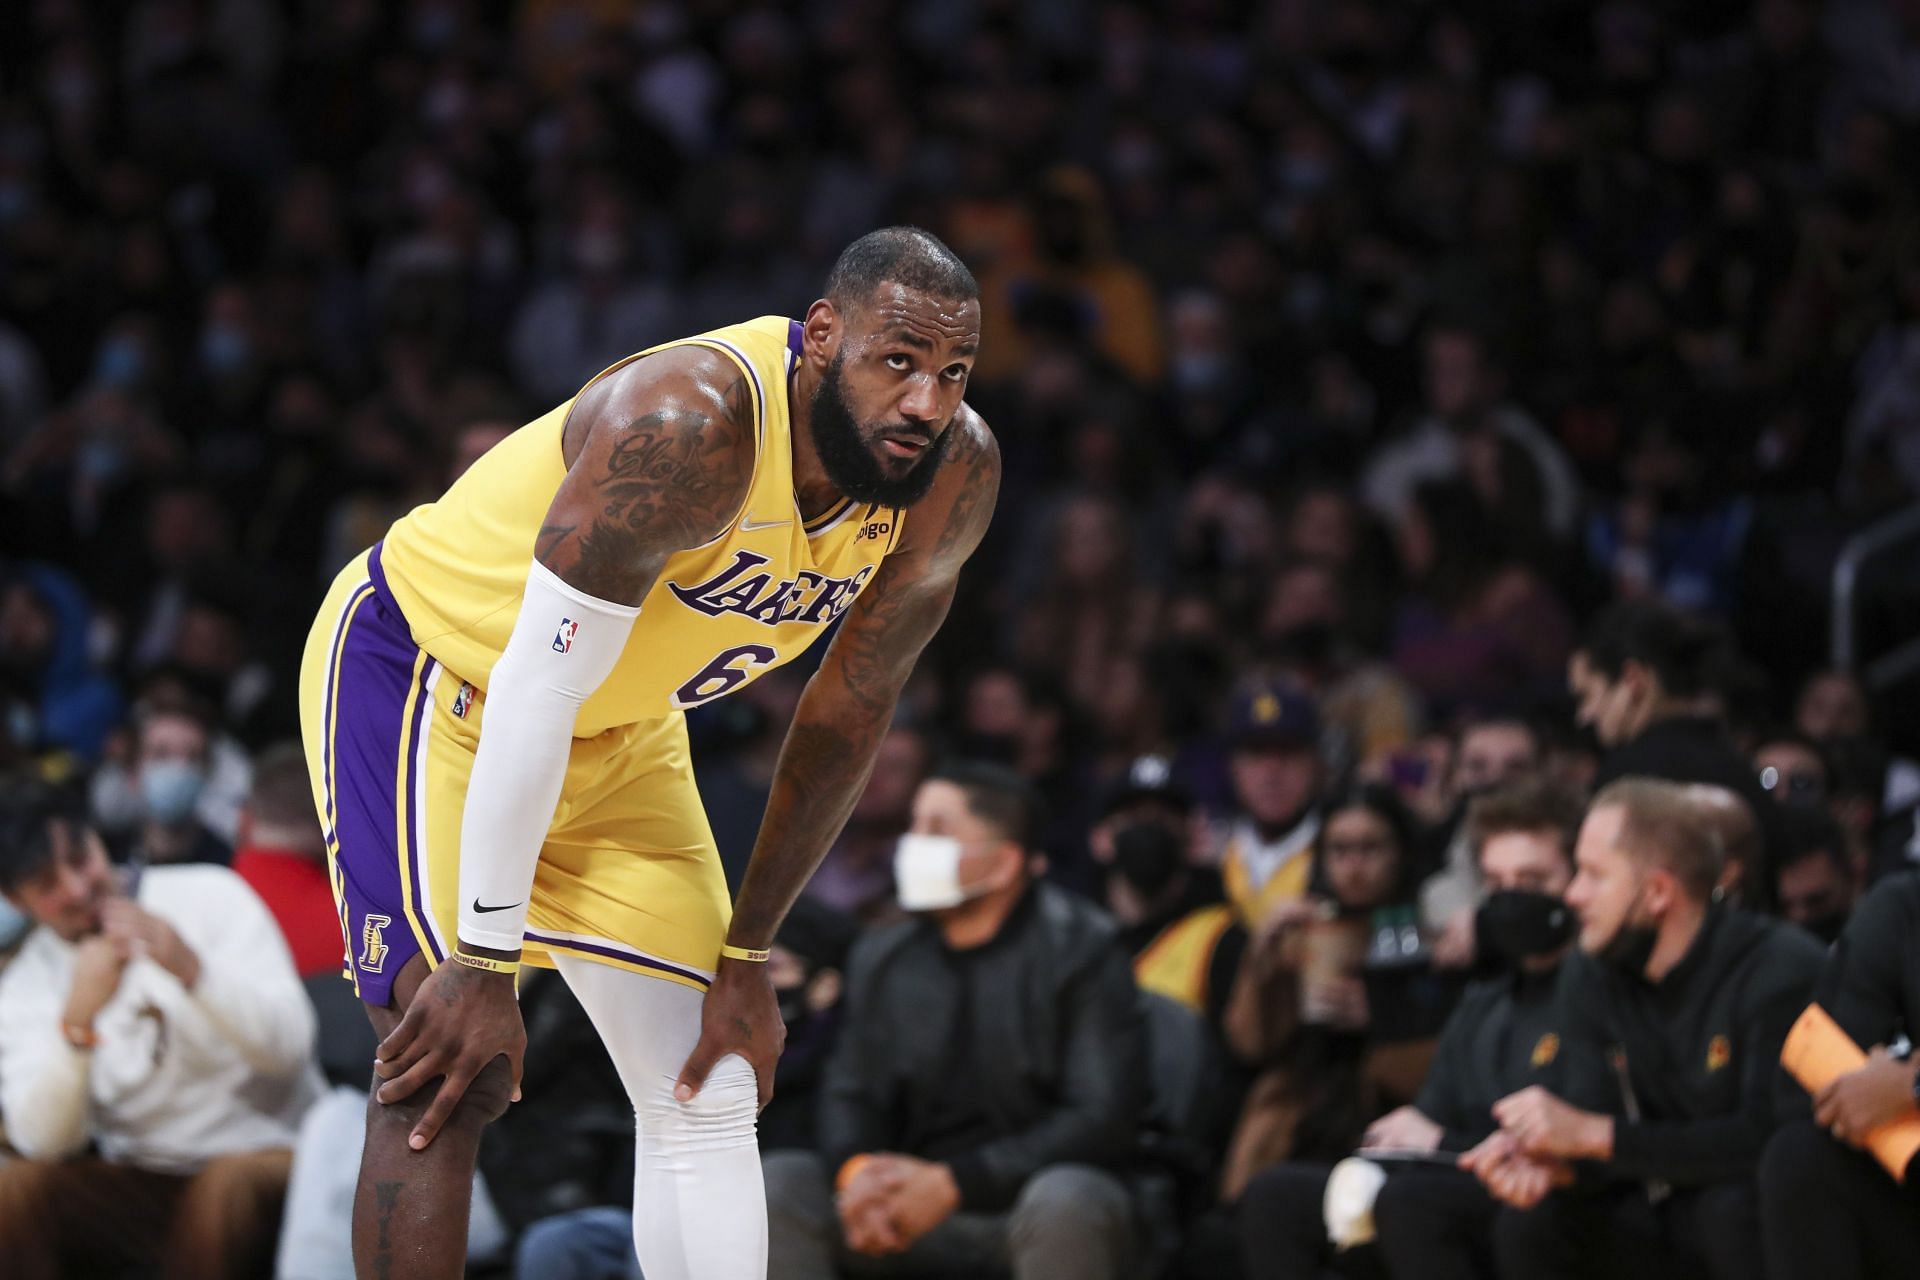 LeBron James will be active for the LA Lakers against the Brooklyn Nets tonight